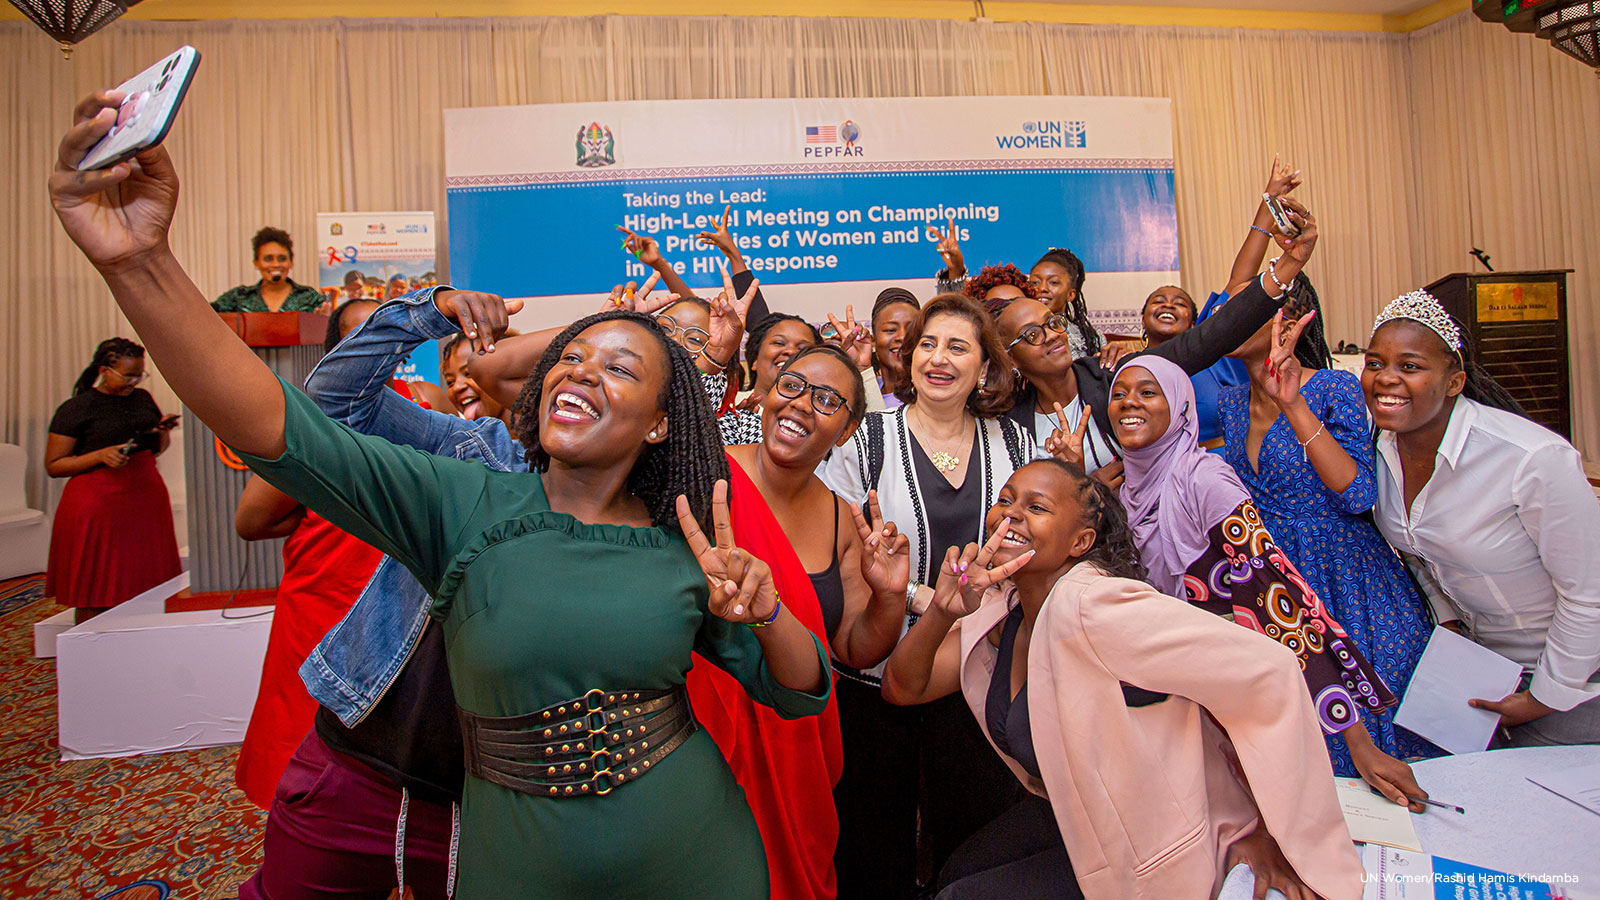 A selfie moment with emerging young leaders, beneficiaries of UN Women programme on young women’s leadership in the HIV response. Photo: UN Women/Rashid Hamis Kindamba 